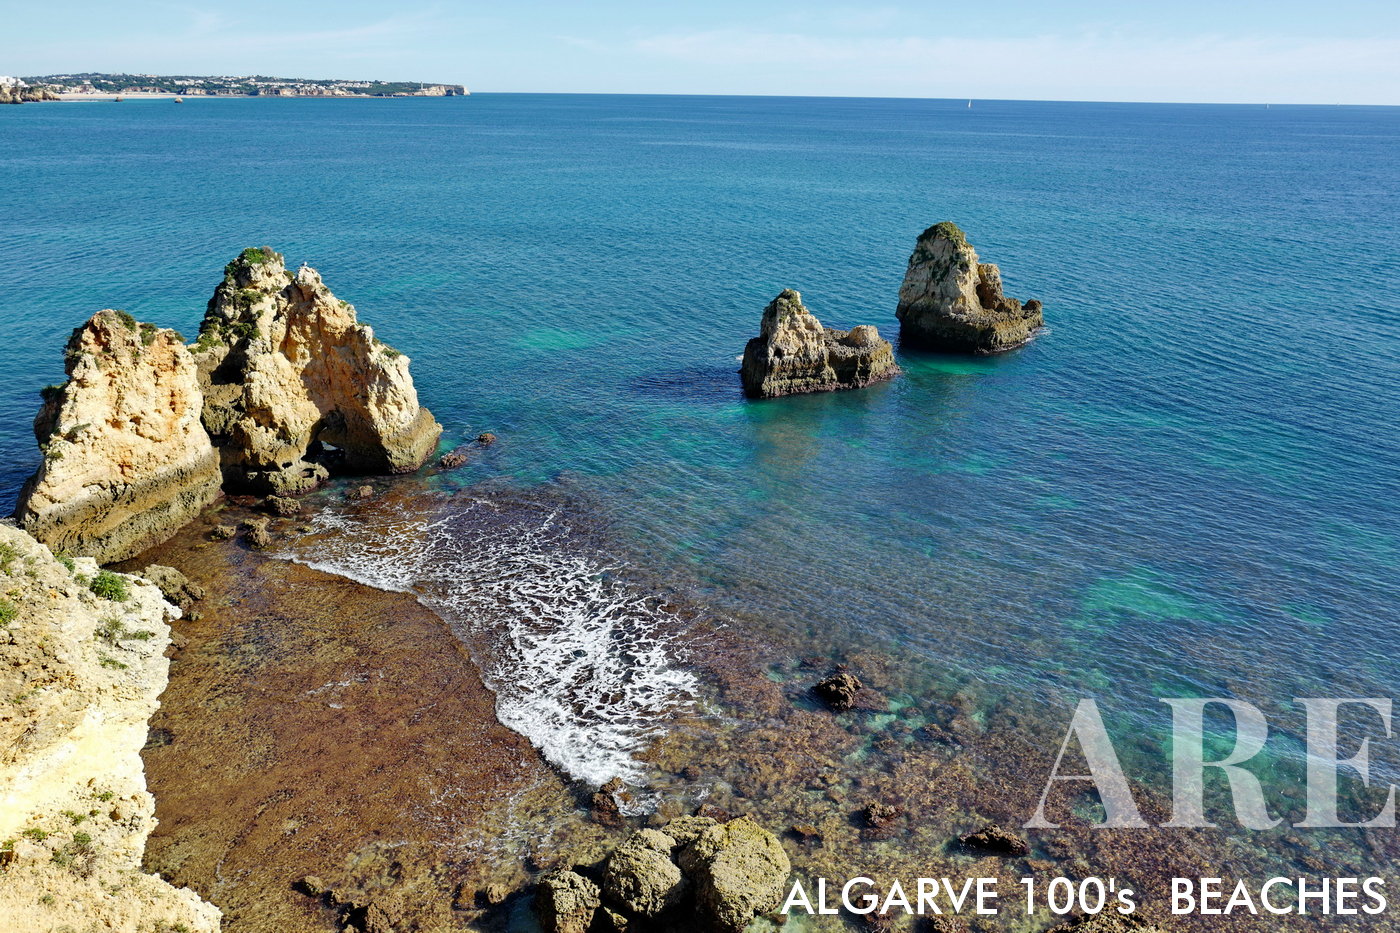 Secreta beach, located between Alvor and Portimão, several small beaches with difficult access, with a fantastic pedestrian route along the cliff...